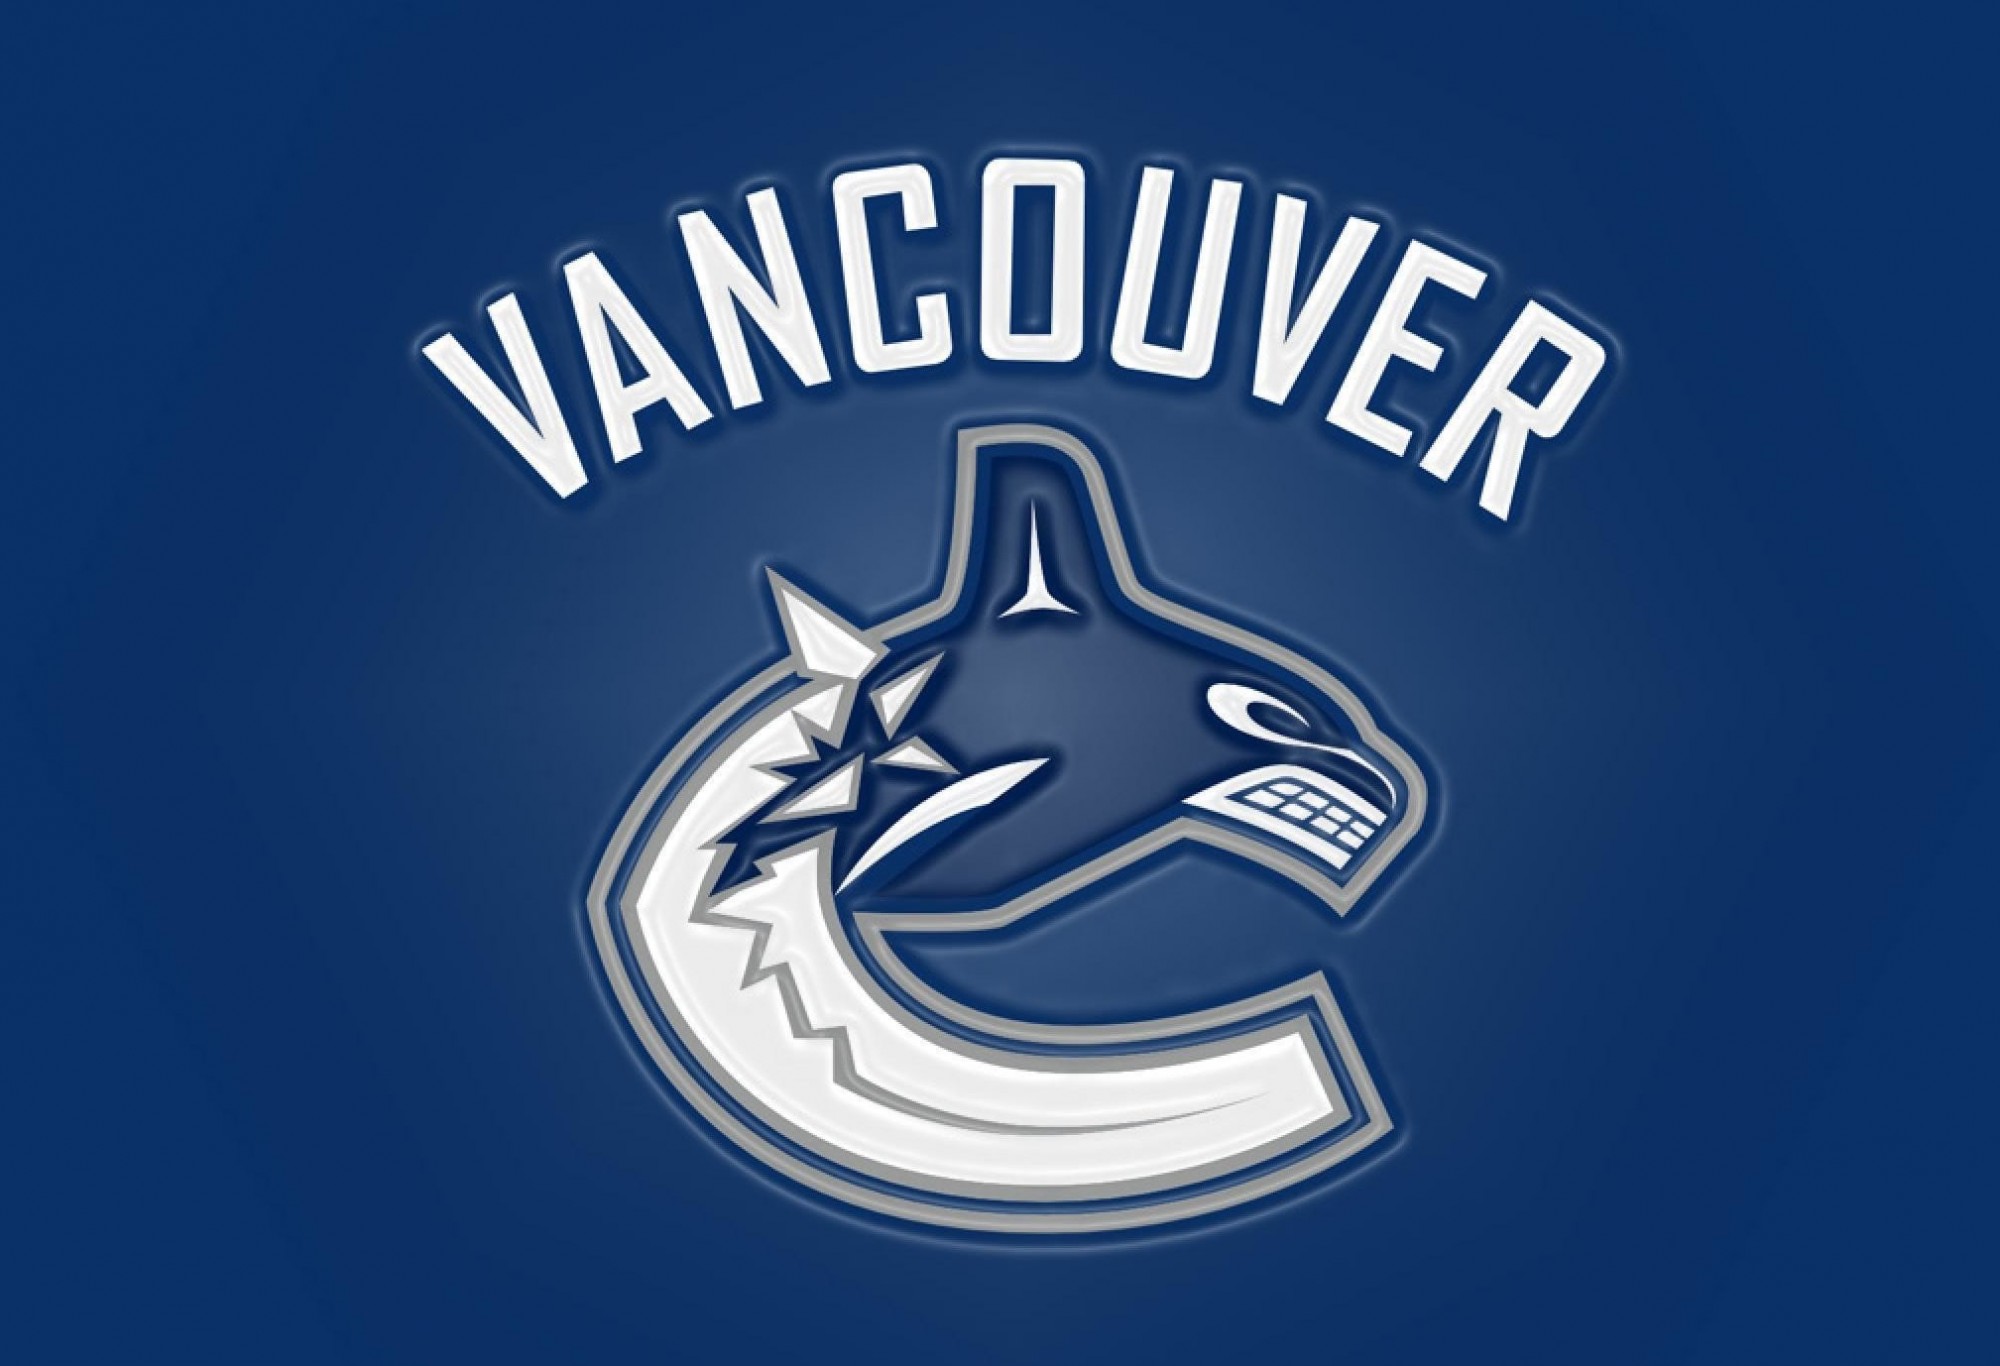 Vancouver Canucks offer to deploy workers to short-staffed seniors’ care homes